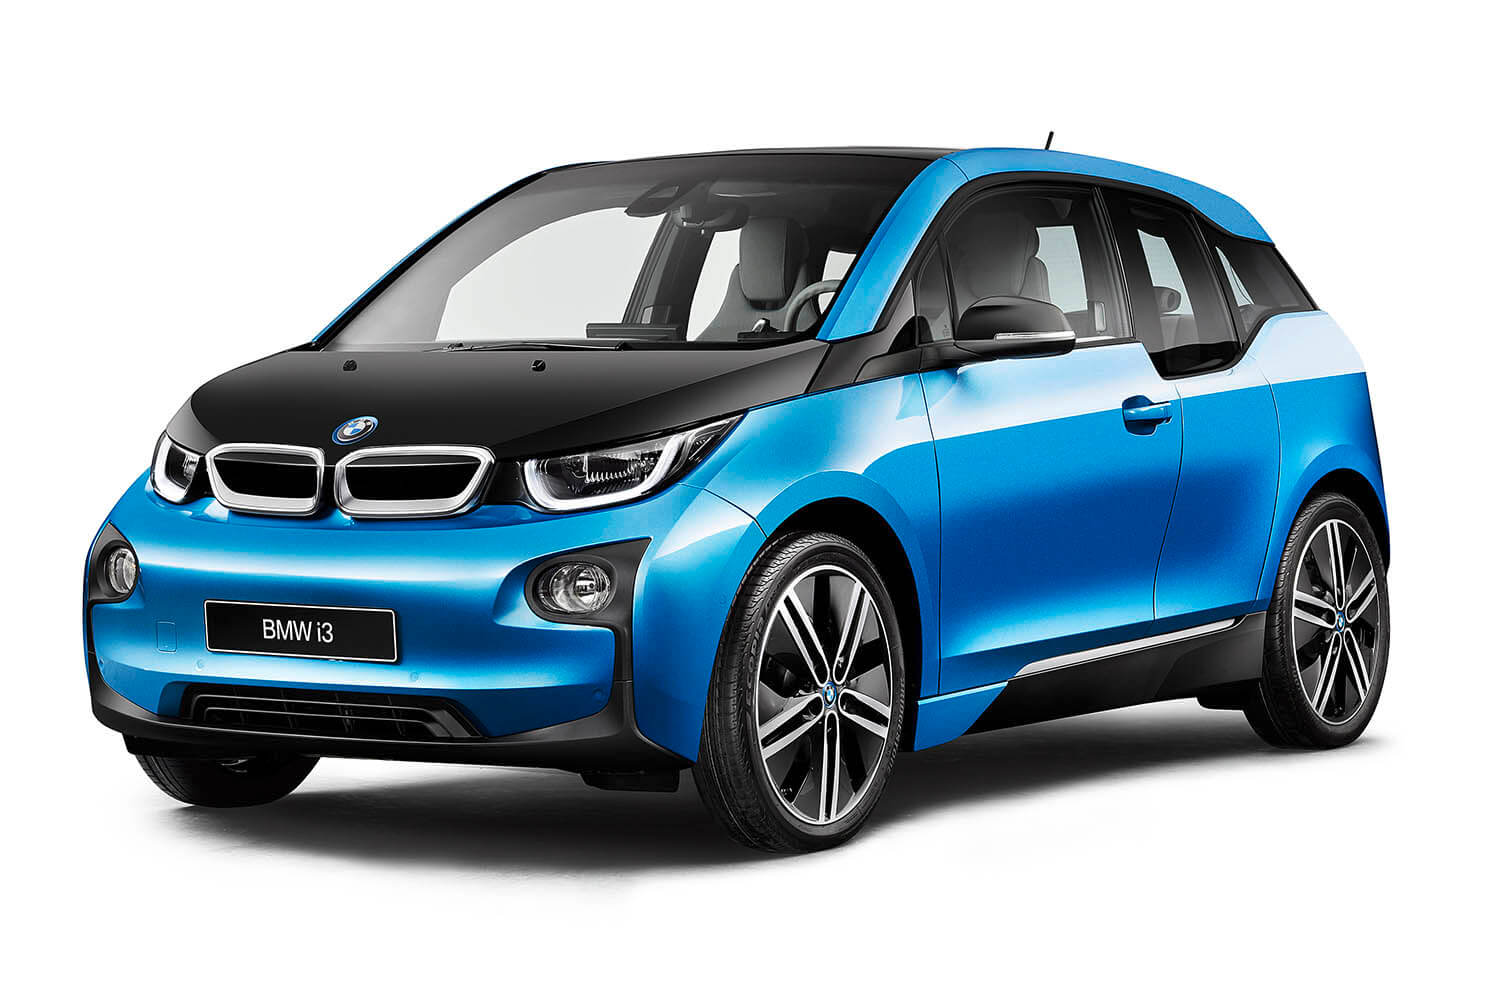 bmw-i3-used-car-buyer-guide-automotive-daily